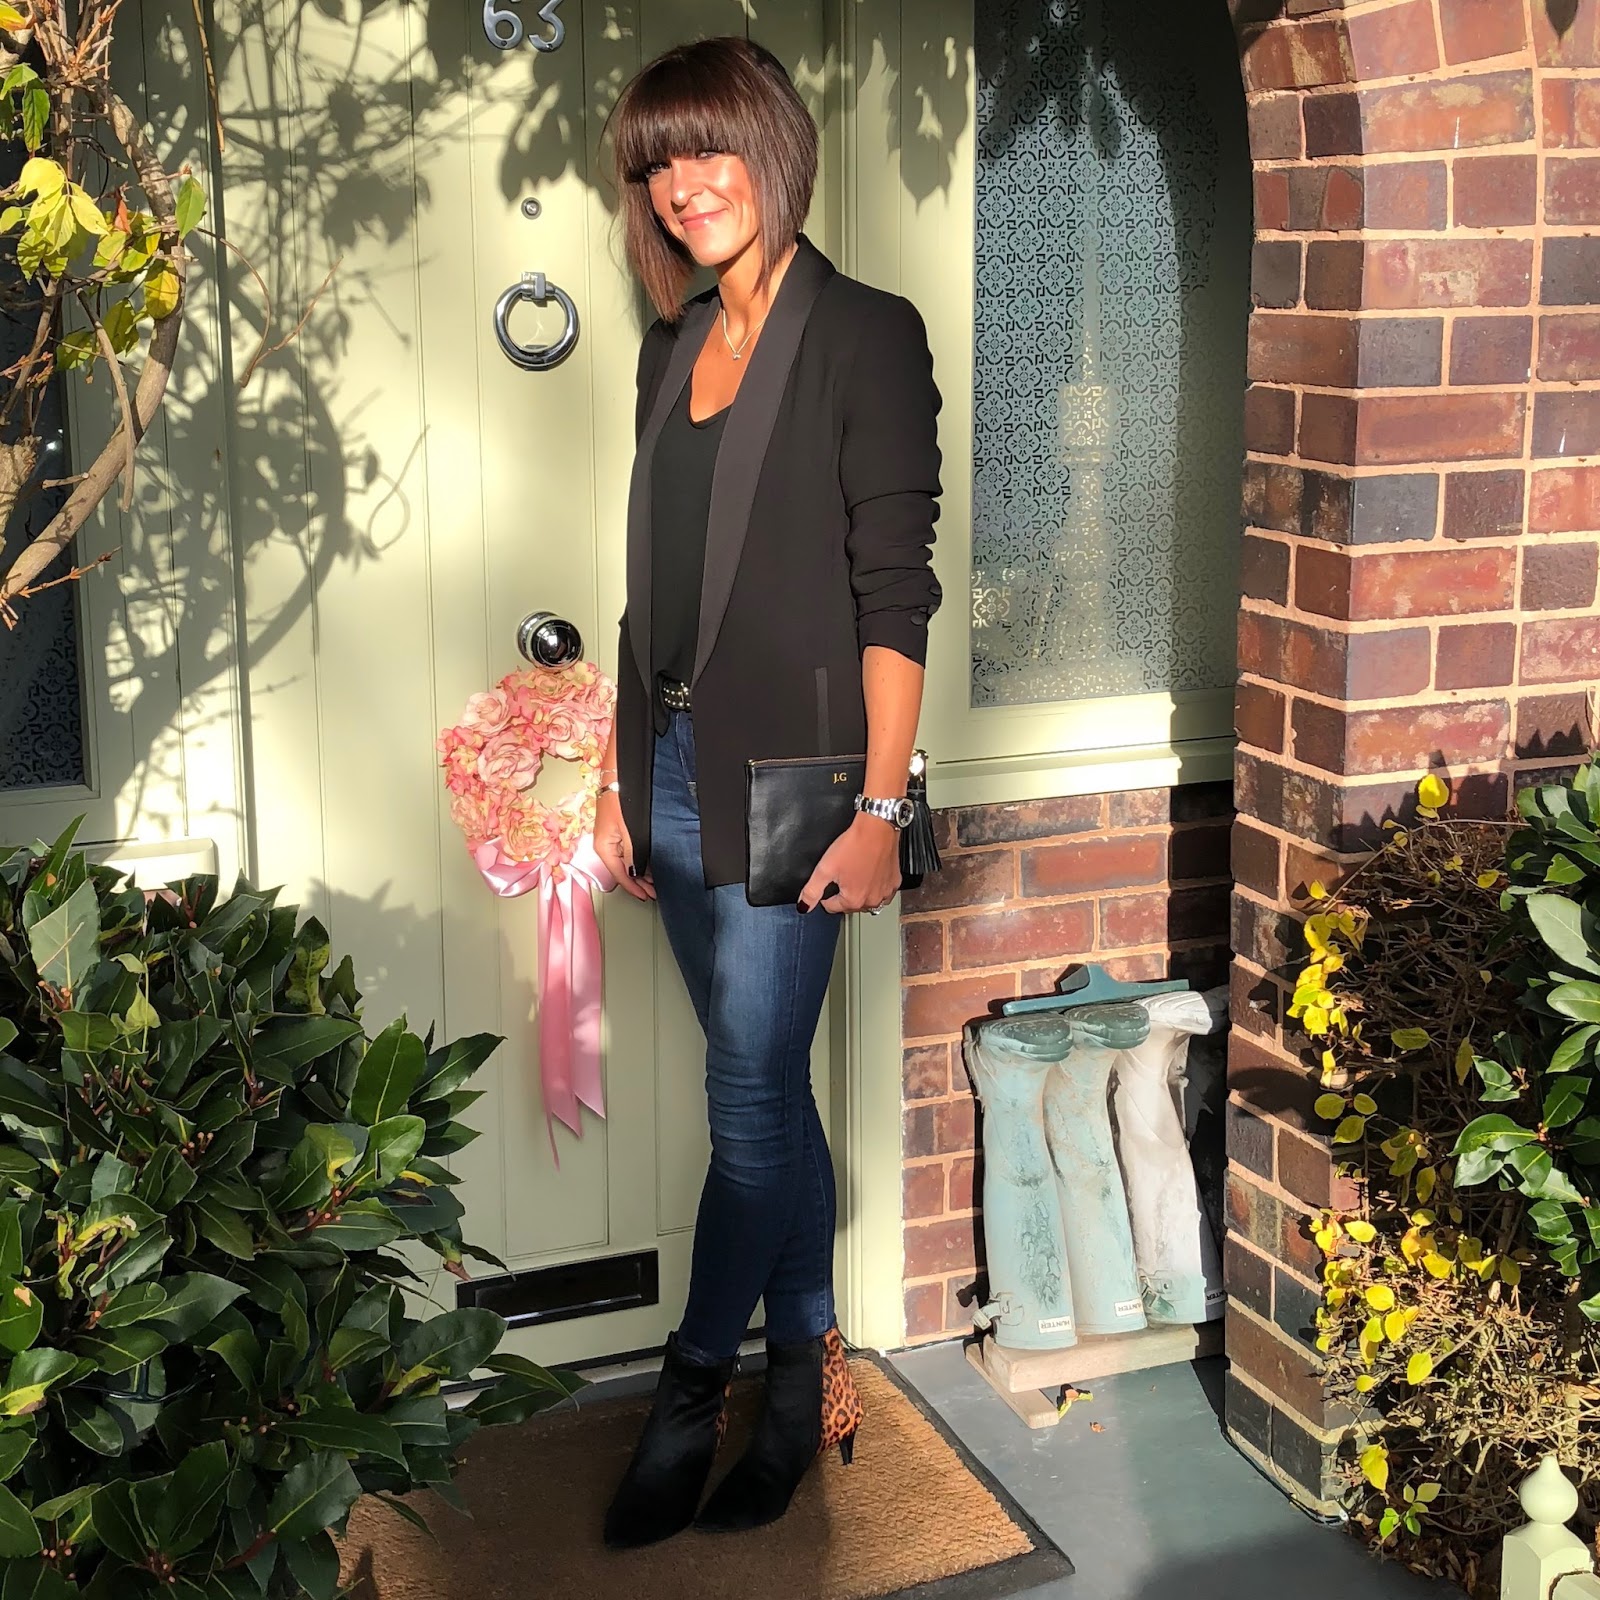 my midlife fashion, fenn wright manson darling jacket, aurora london, spendid batwing sleeve t shirt, j crew toothpick 8" skinny jeans, marks and spencer stiletto heel size zip ankle boots